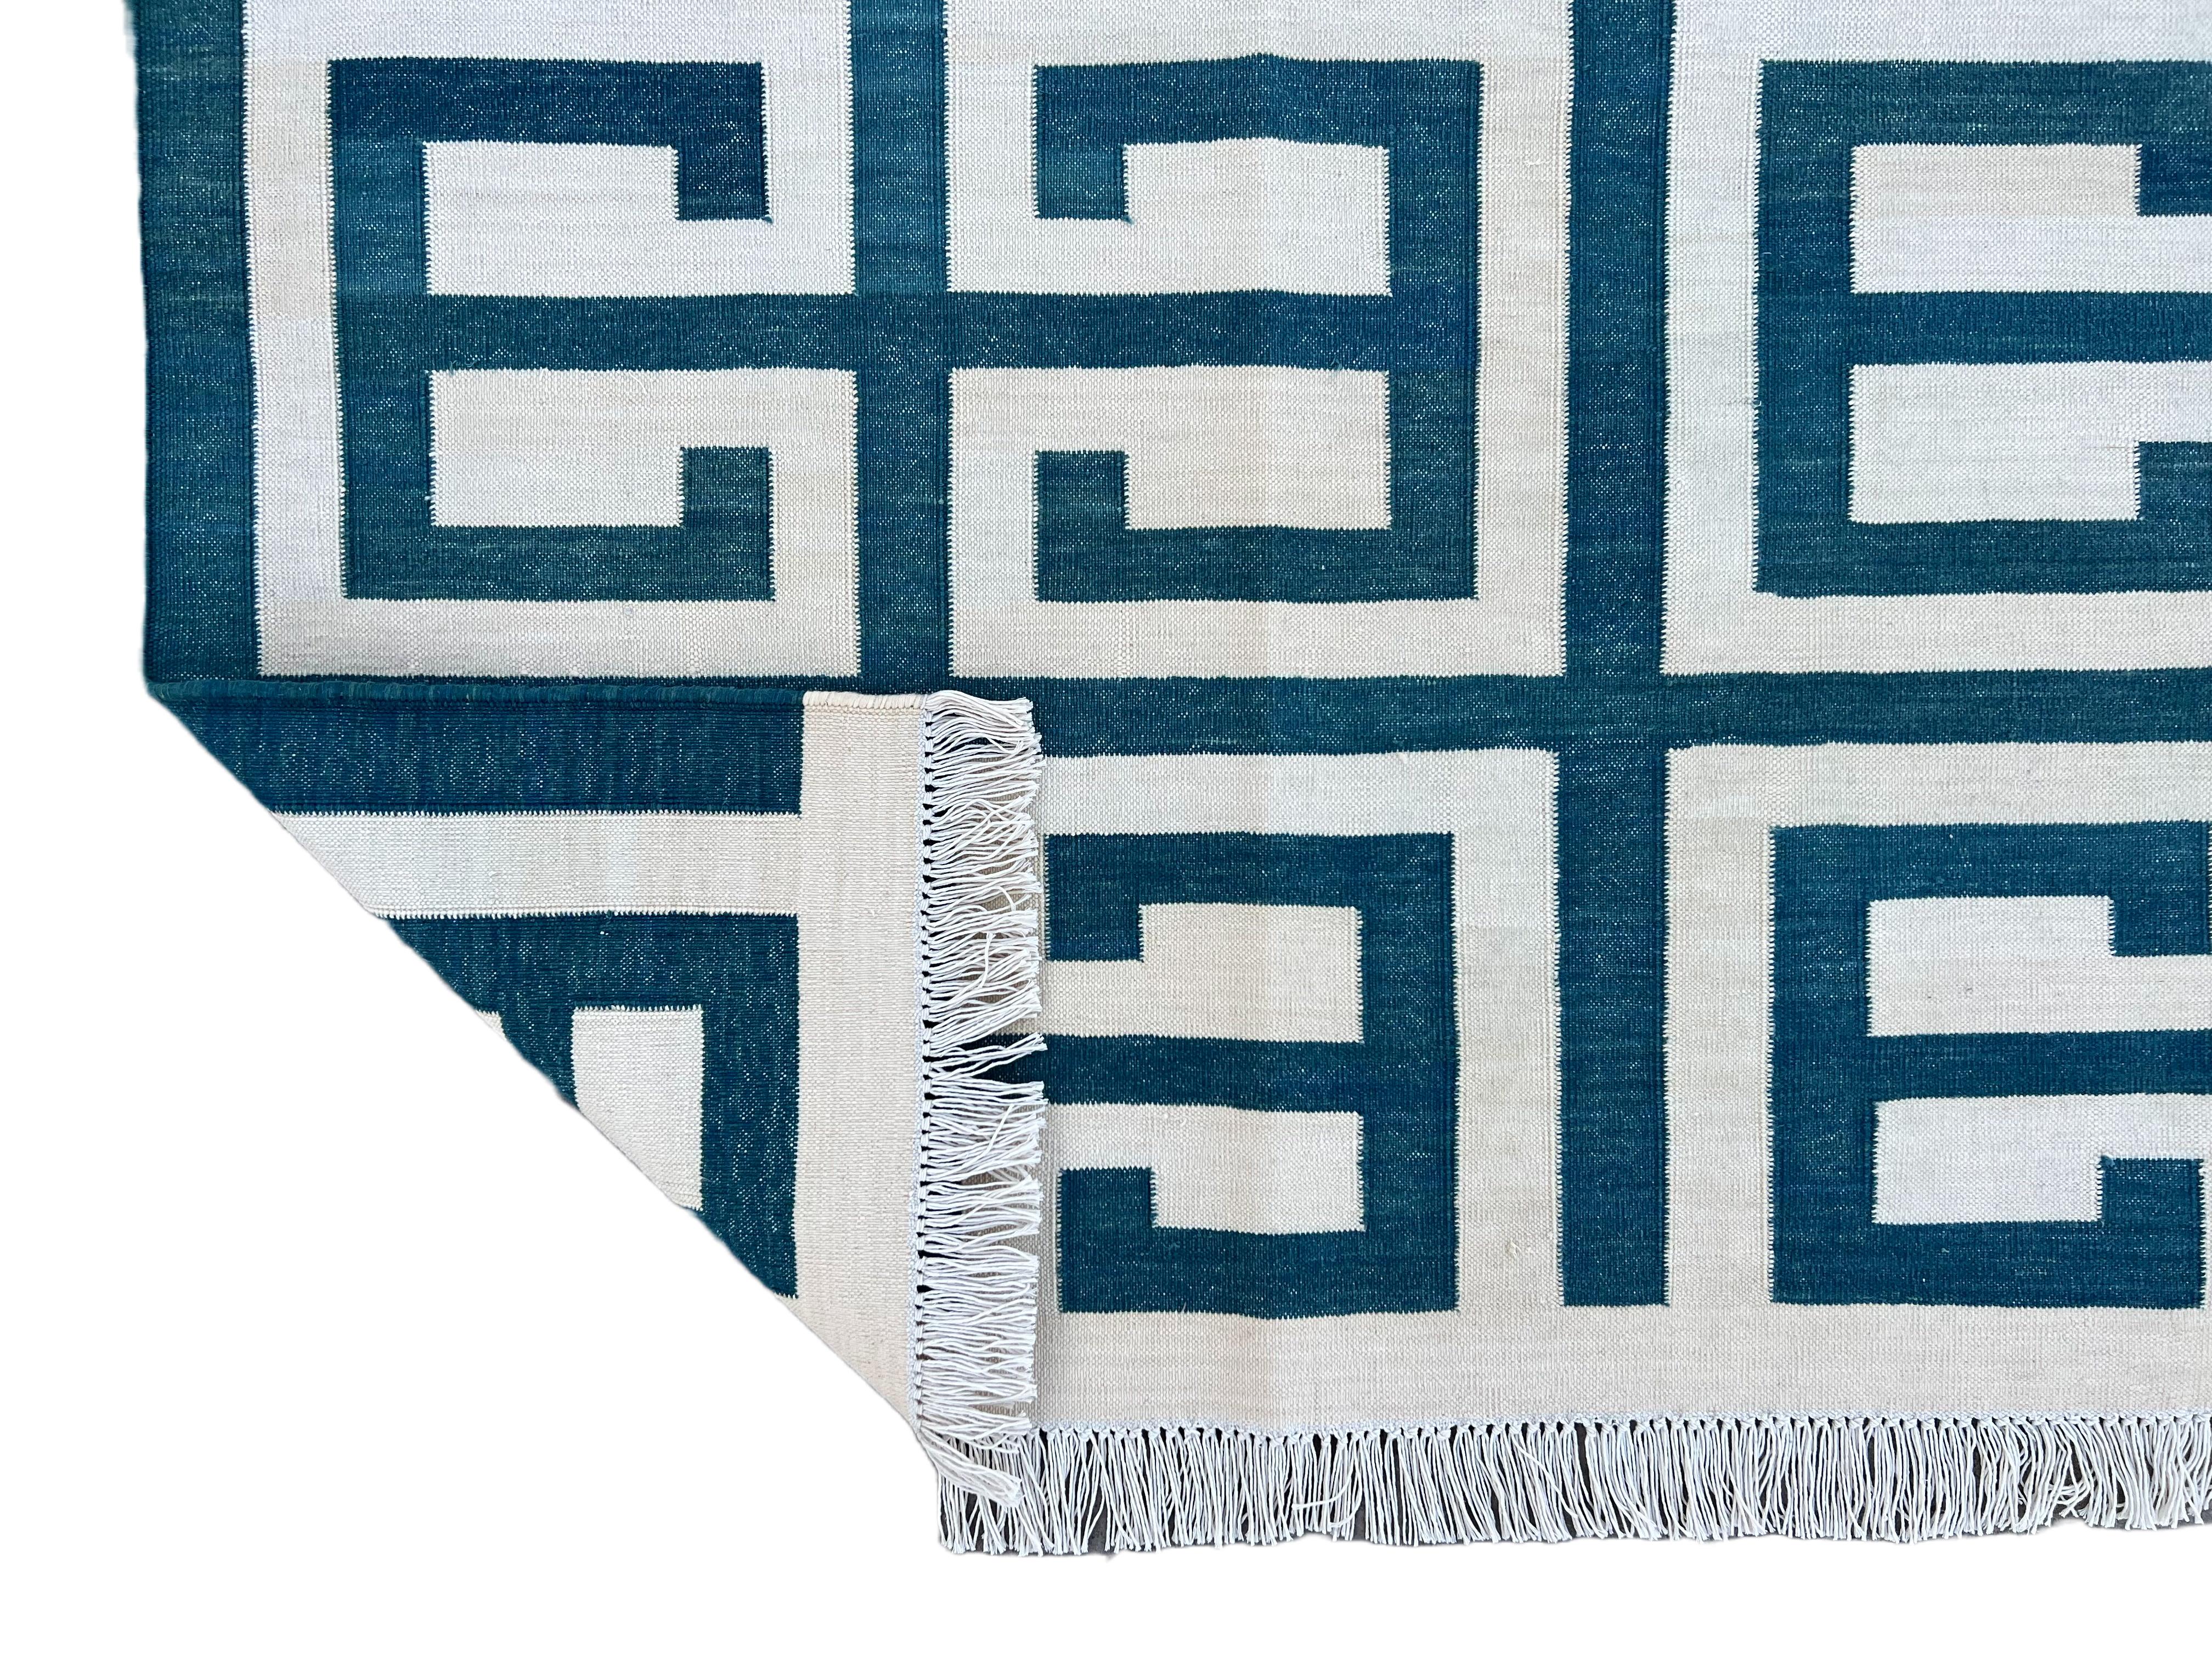 Handmade Cotton Area Flat Weave Rug, Blue And White Geometric Indian Dhurrie Rug For Sale 5